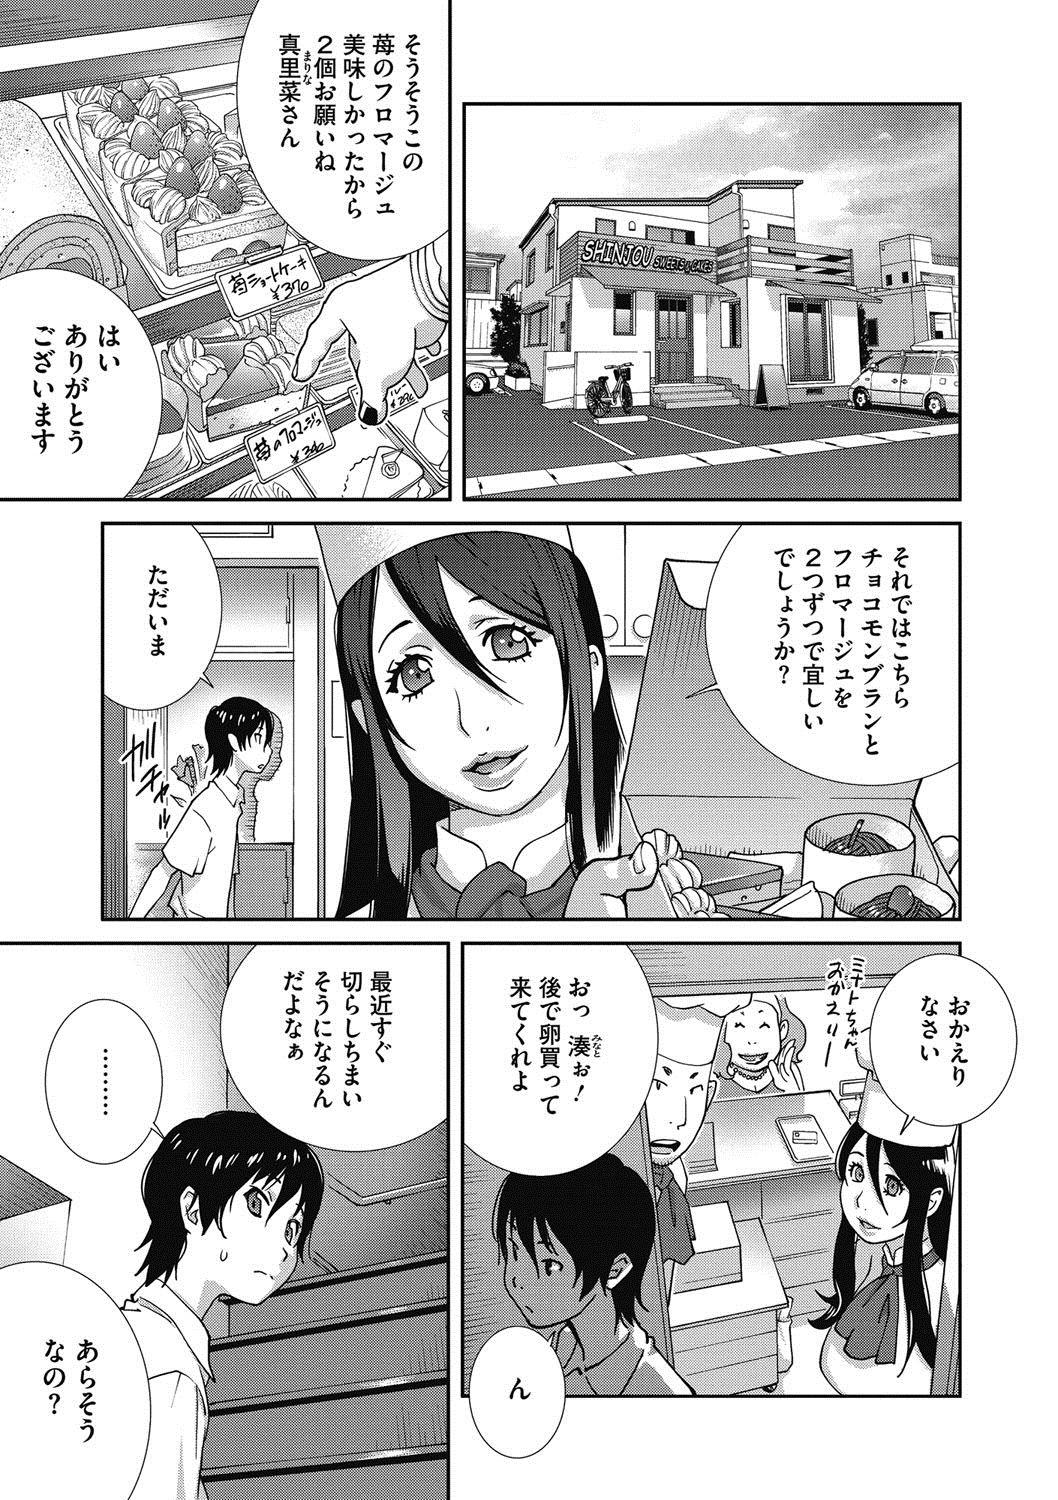 [Kotoyoshi Yumisuke] Haha to Ane to Aoi Ichigo no Fromage - Fromage of mother and an older sister and a blue strawberry Ch. 1-4 2